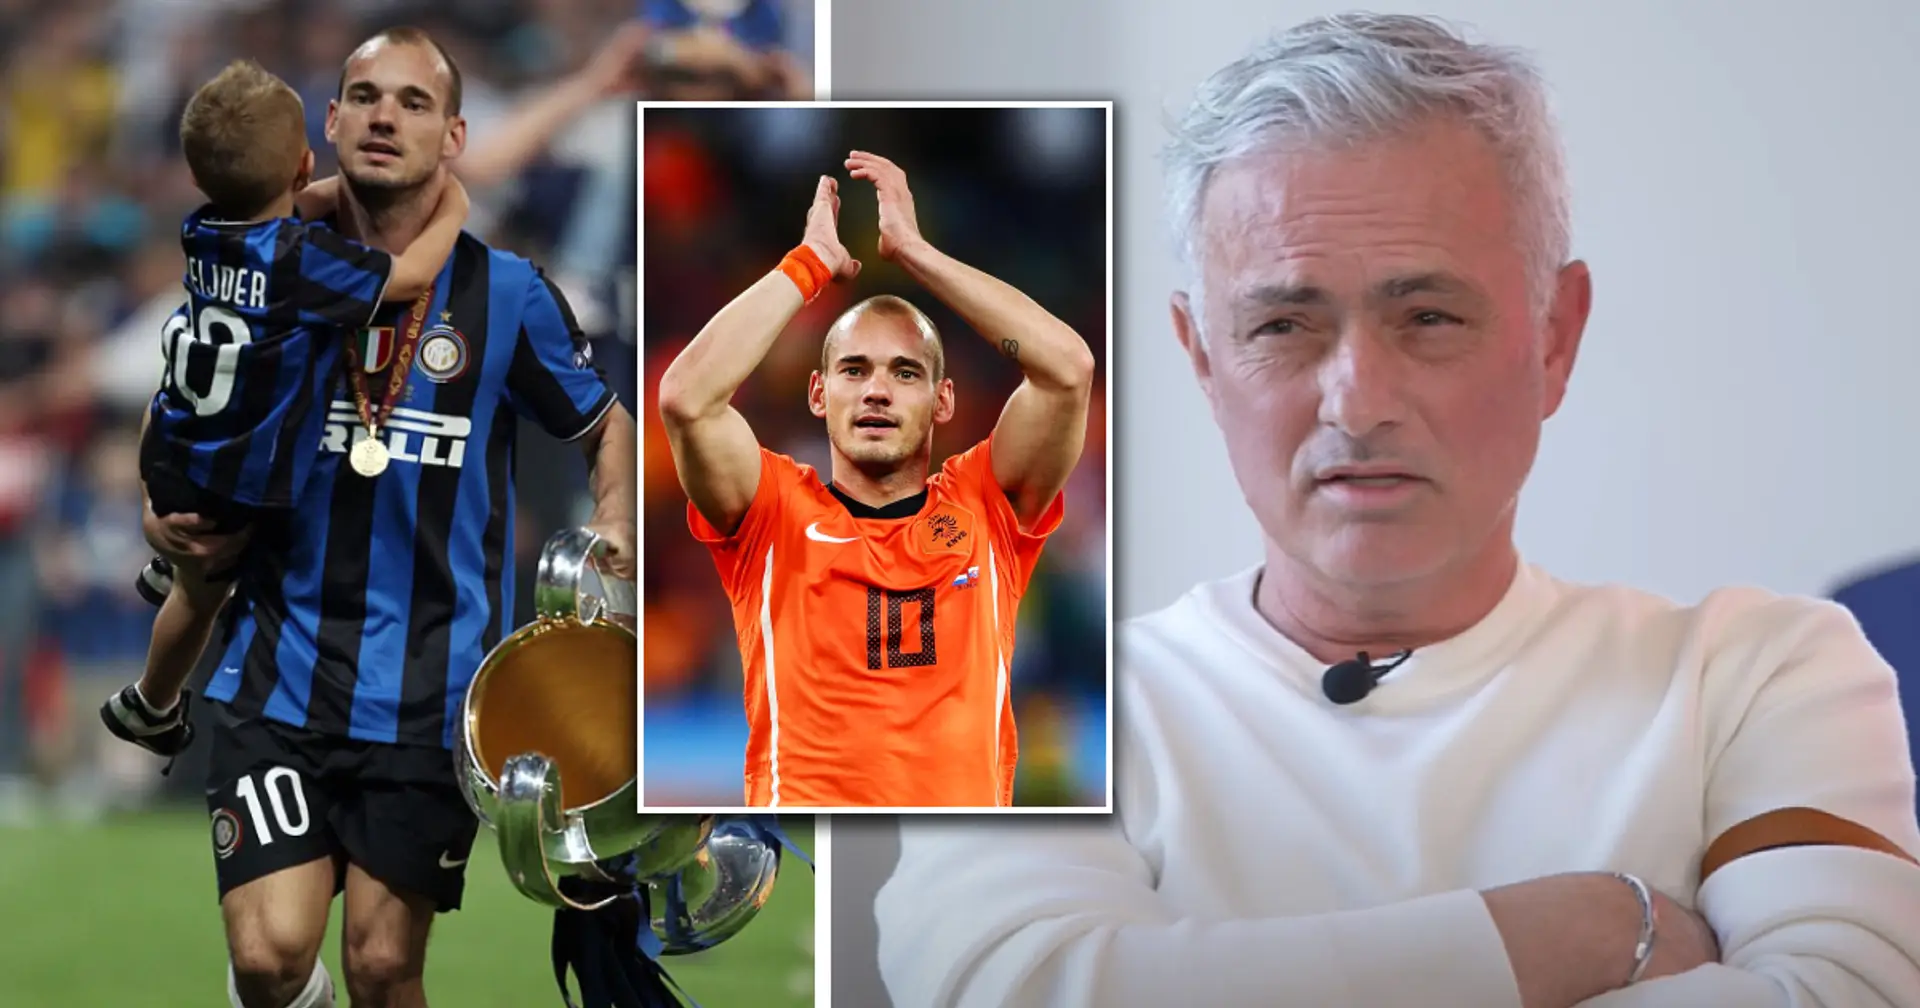 'Who won it?': Jose Mourinho explains why Wesley Sneijder wasn't robbed in 2010 Ballon d'Or race